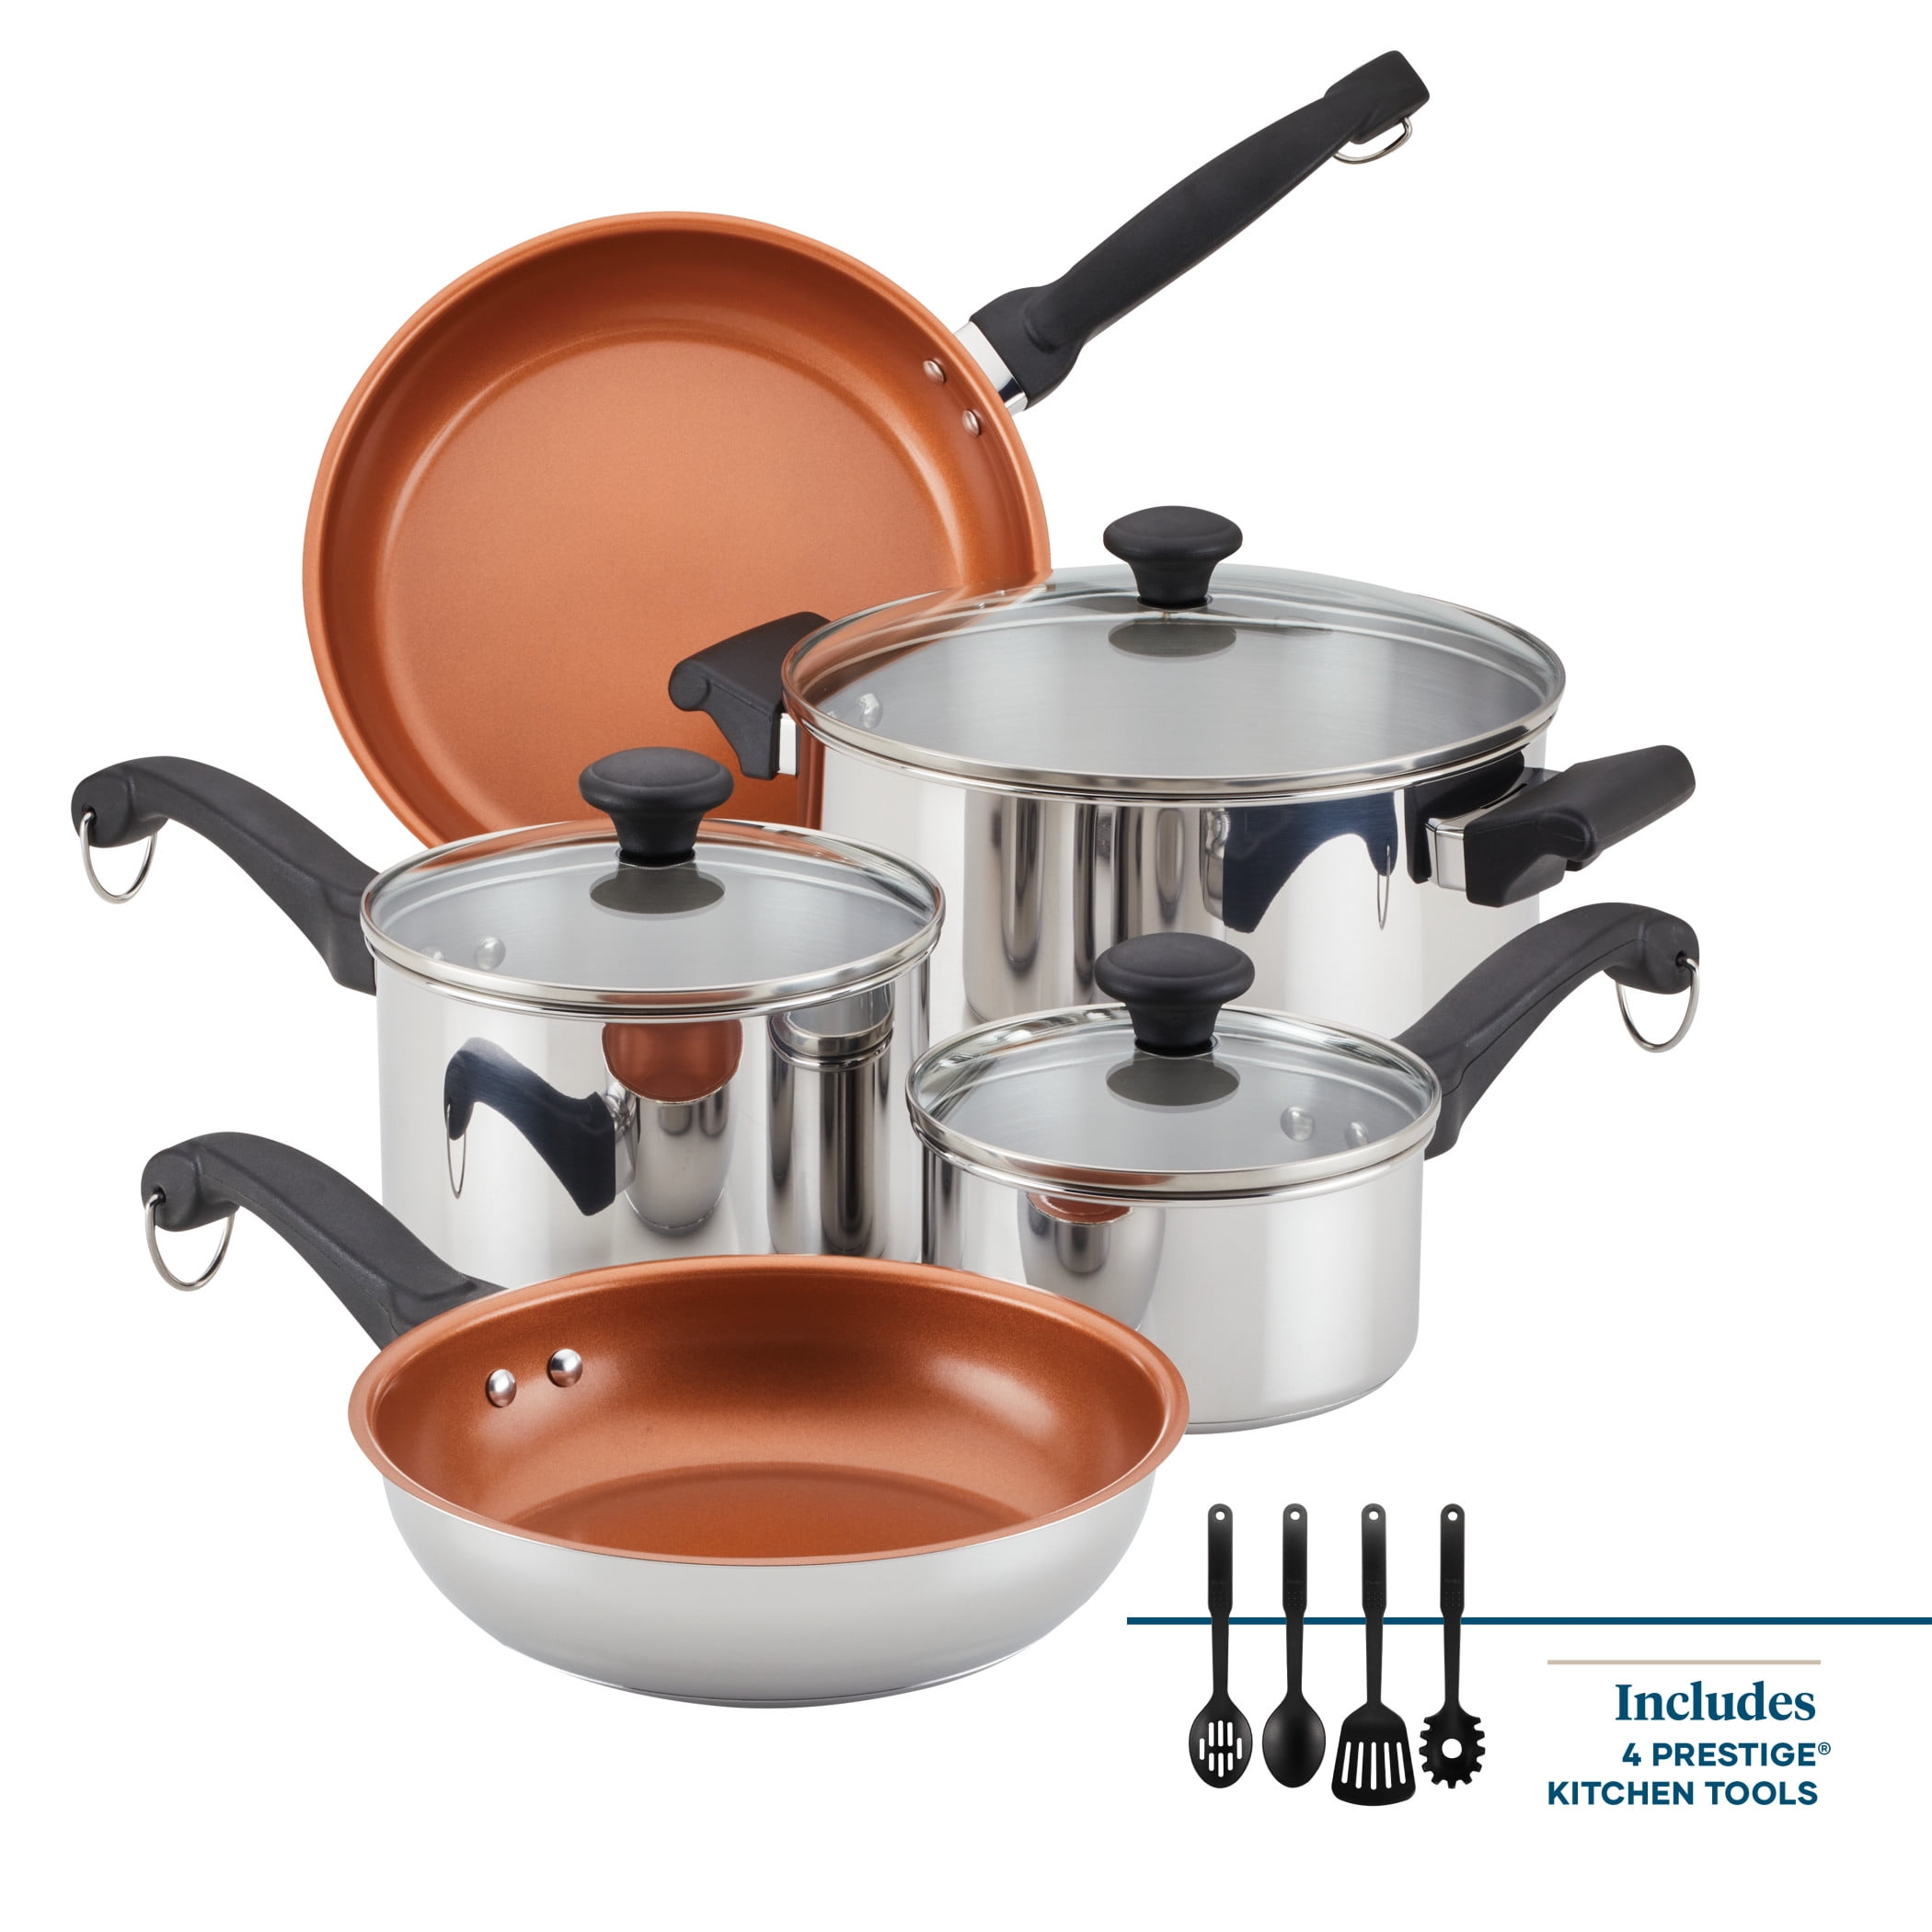 Farberware Classic Traditions Stainless Steel Cookware Set with Ceramic Frypans, 12-Piece Set